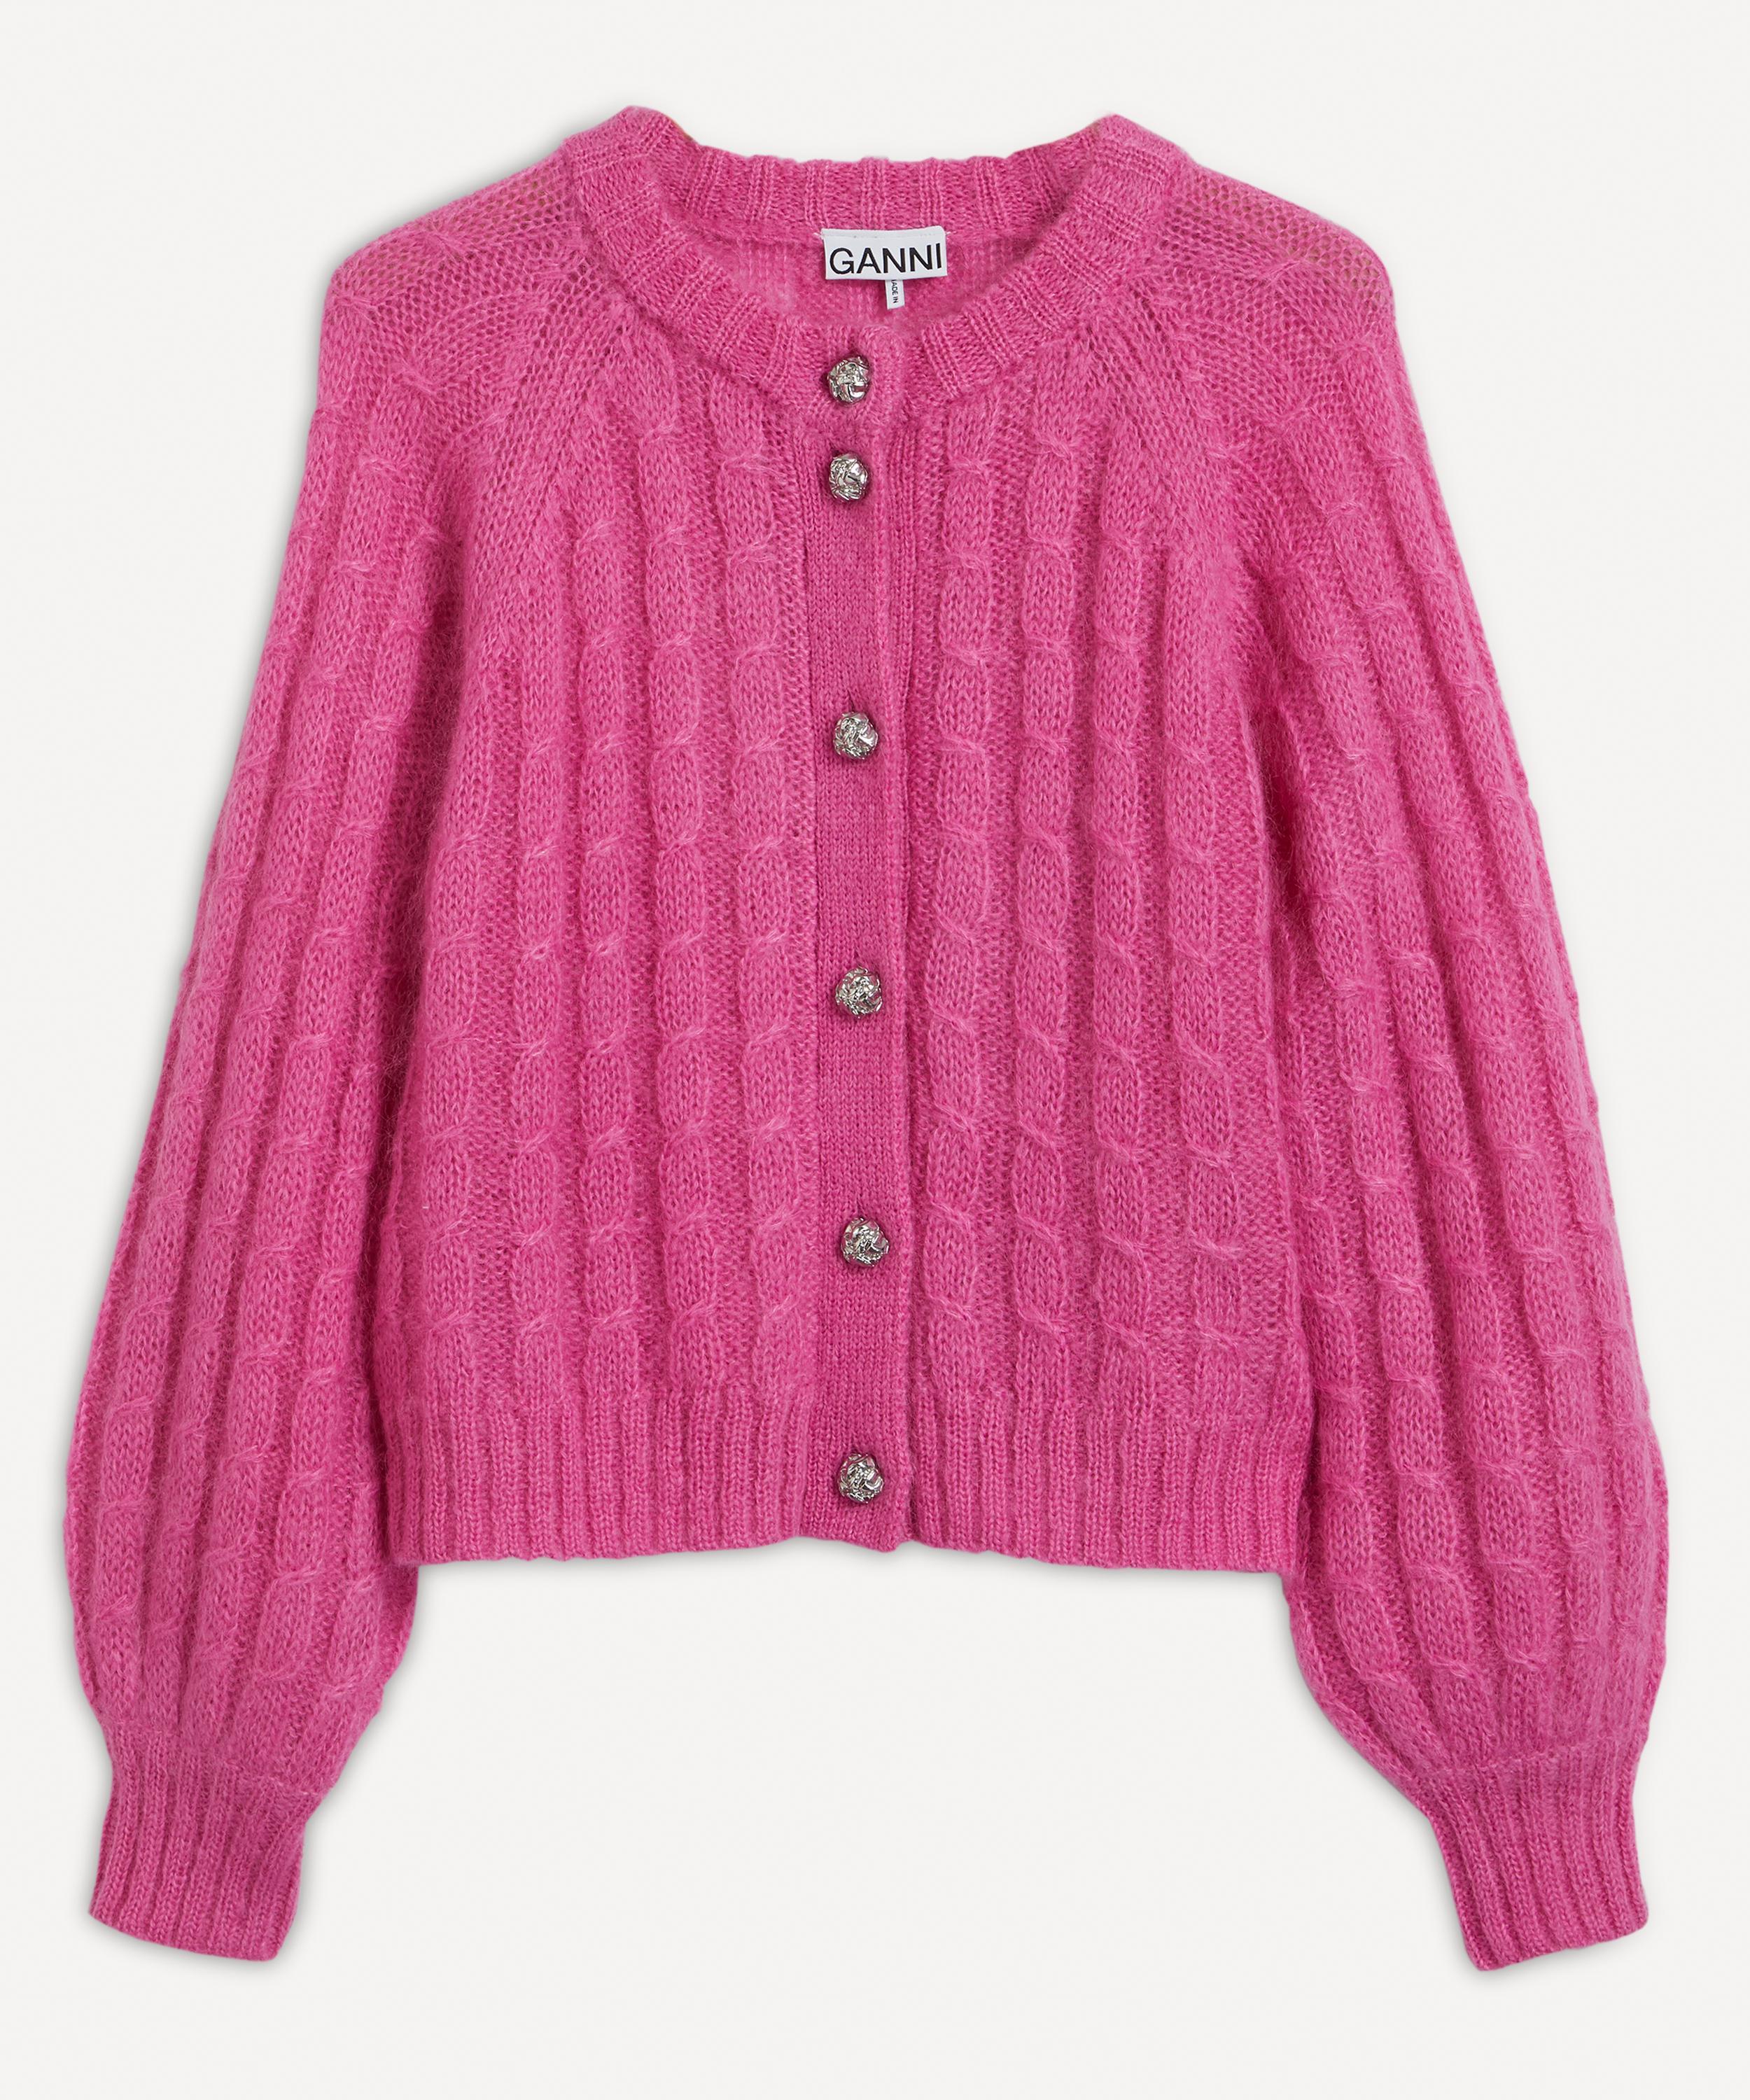 Ganni Wool Mohair Cable-knit Cardigan - Size 4 in Pink | Lyst